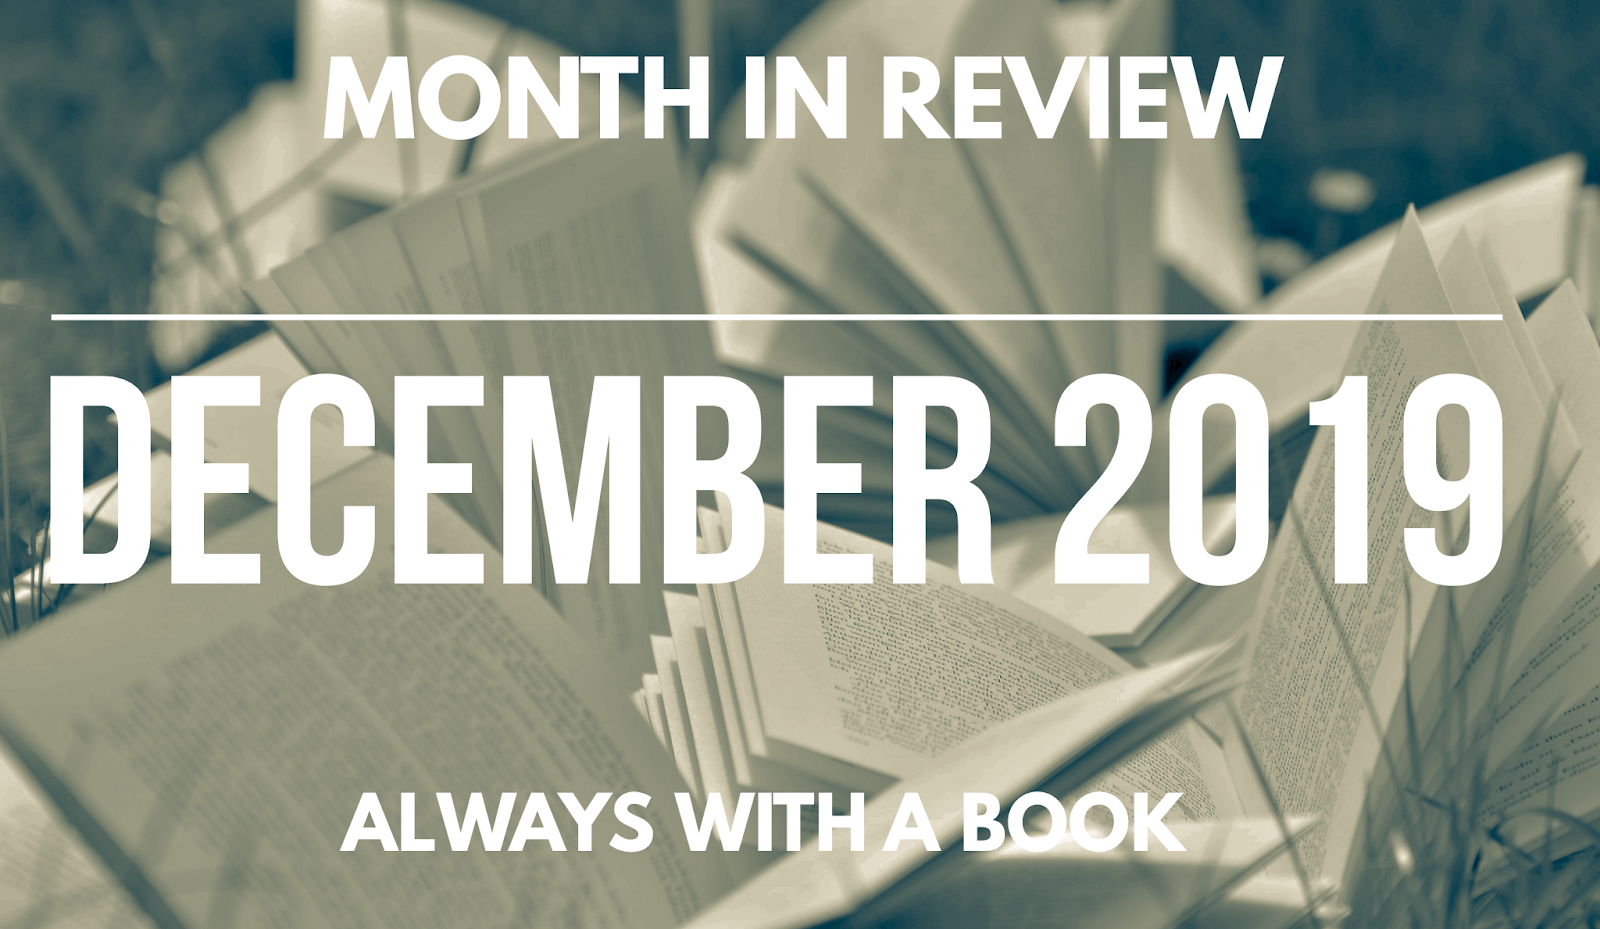 Month in Review: December 2019